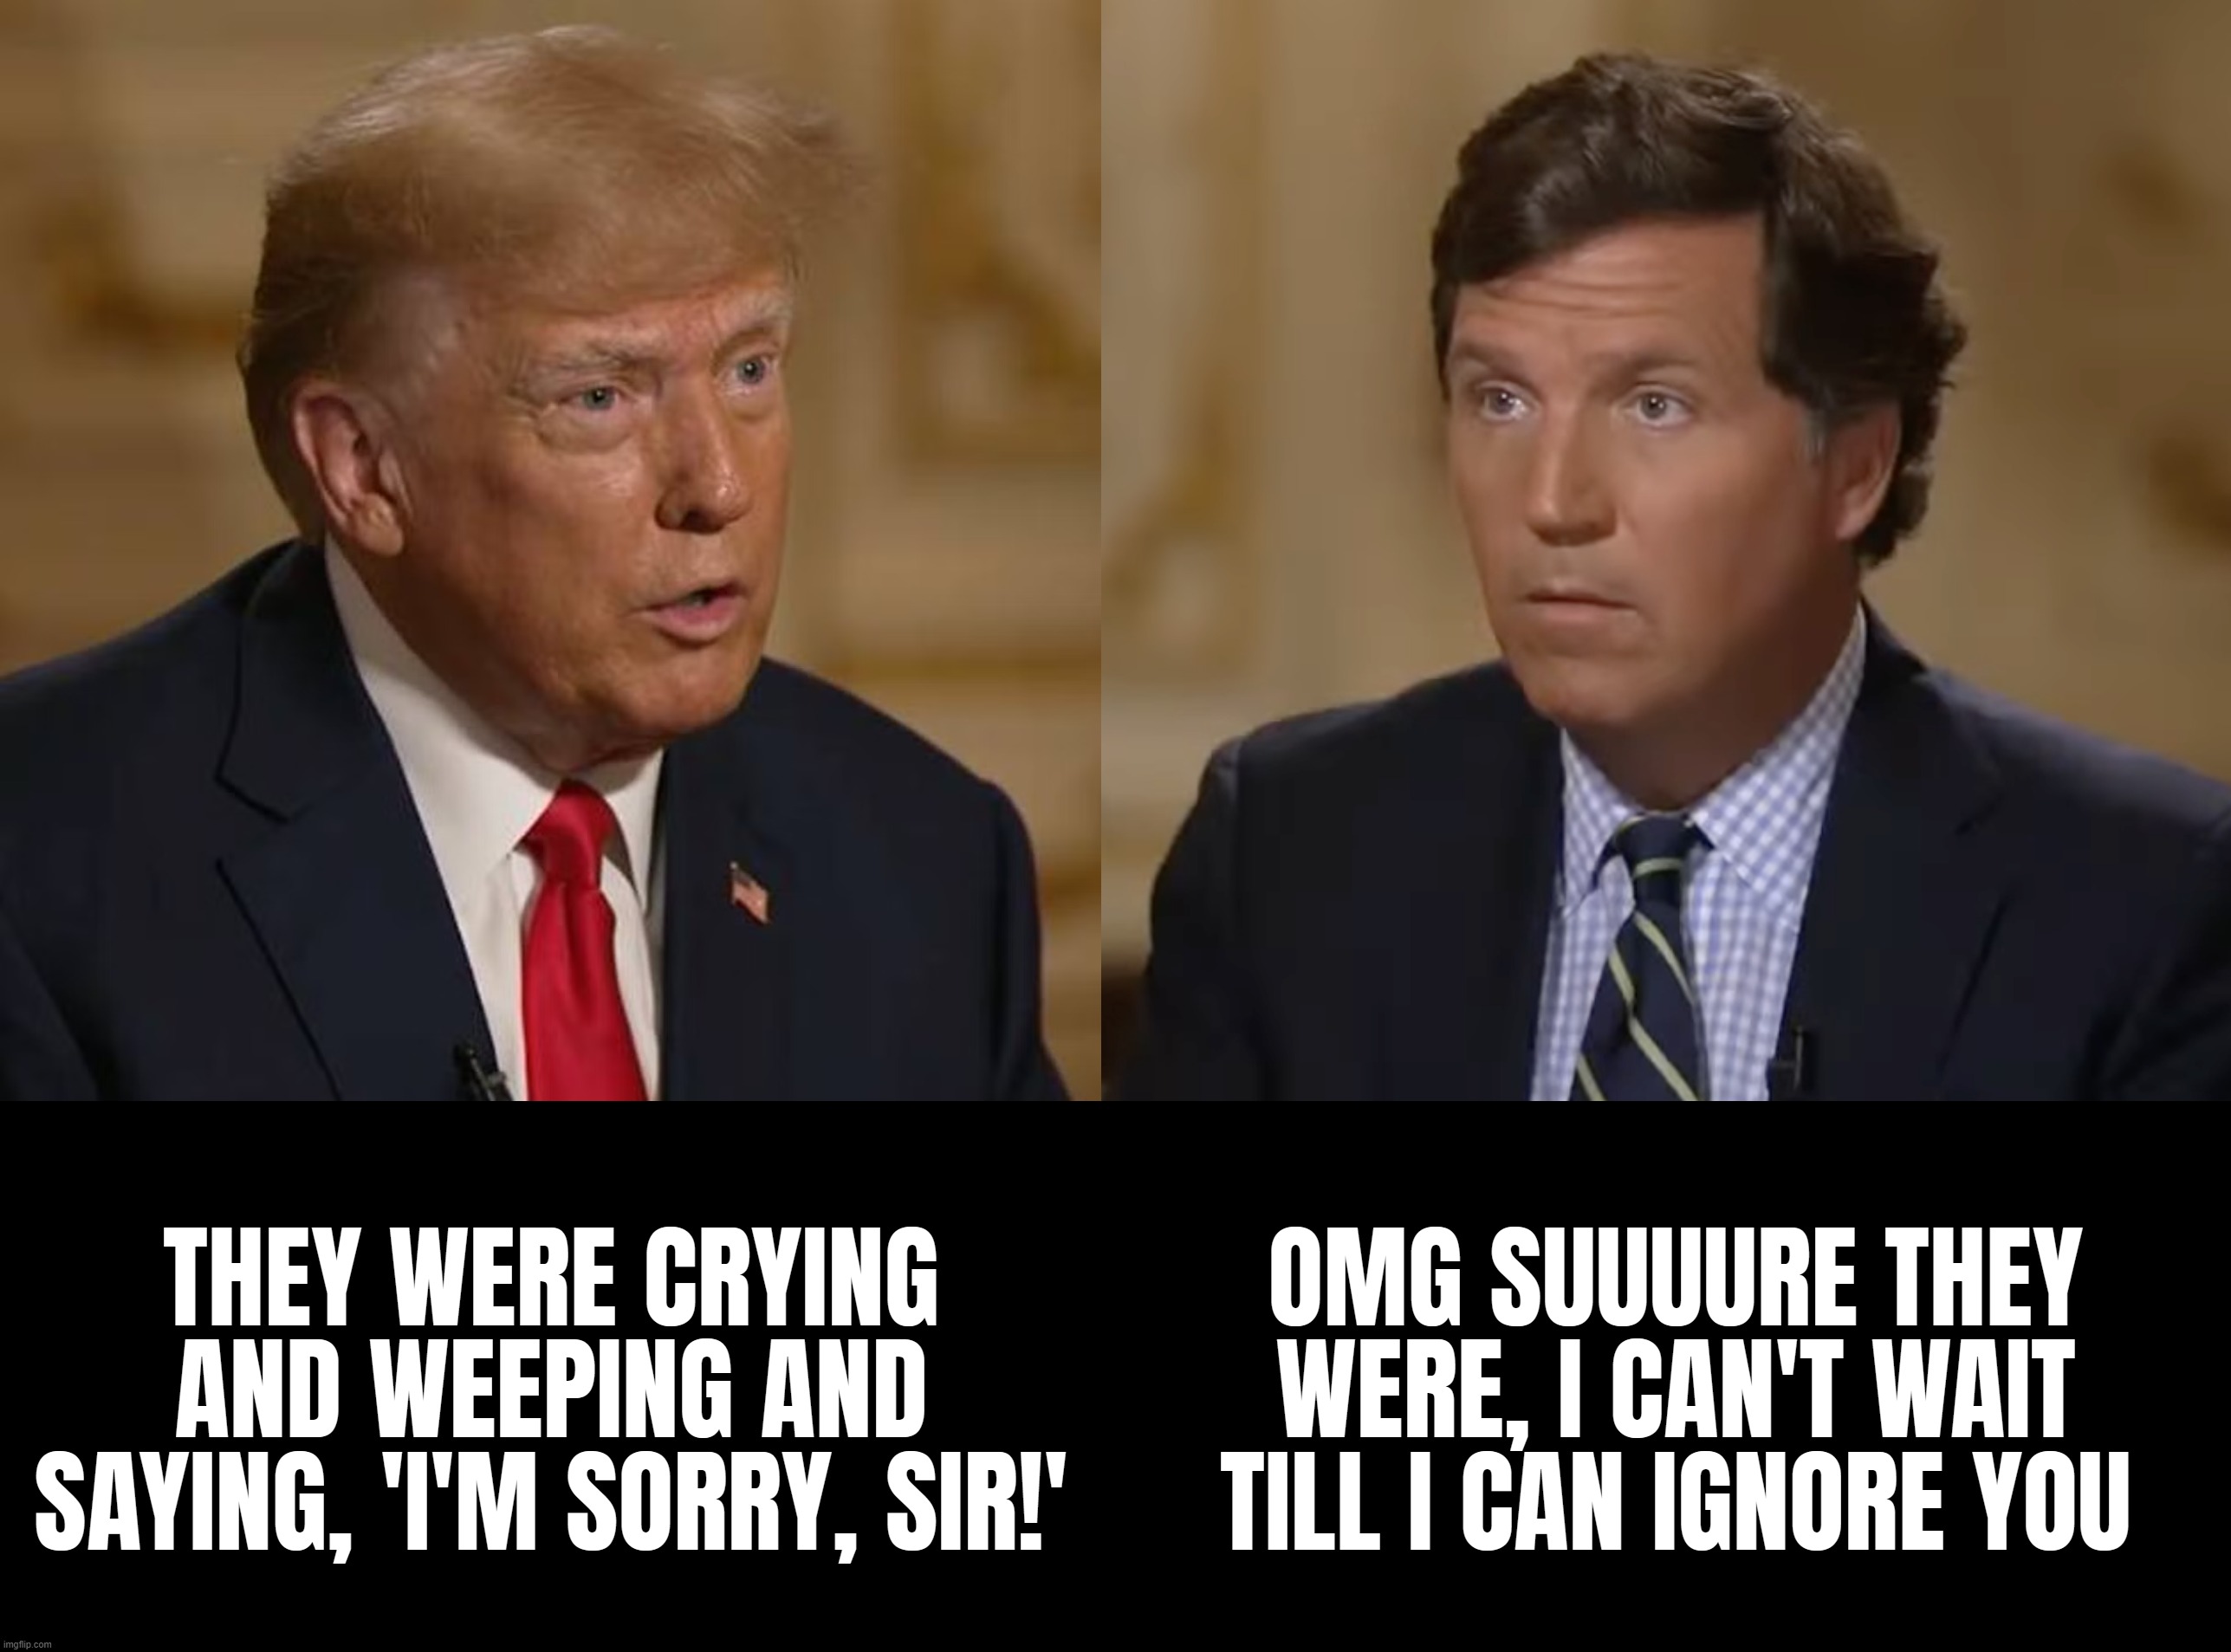 its hard to believe this kinda shit is on TV... what a pathetic shitshow... | THEY WERE CRYING AND WEEPING AND SAYING, 'I'M SORRY, SIR!'; OMG SUUUURE THEY WERE, I CAN'T WAIT TILL I CAN IGNORE YOU | image tagged in trump,confused tucker carlson,liars | made w/ Imgflip meme maker